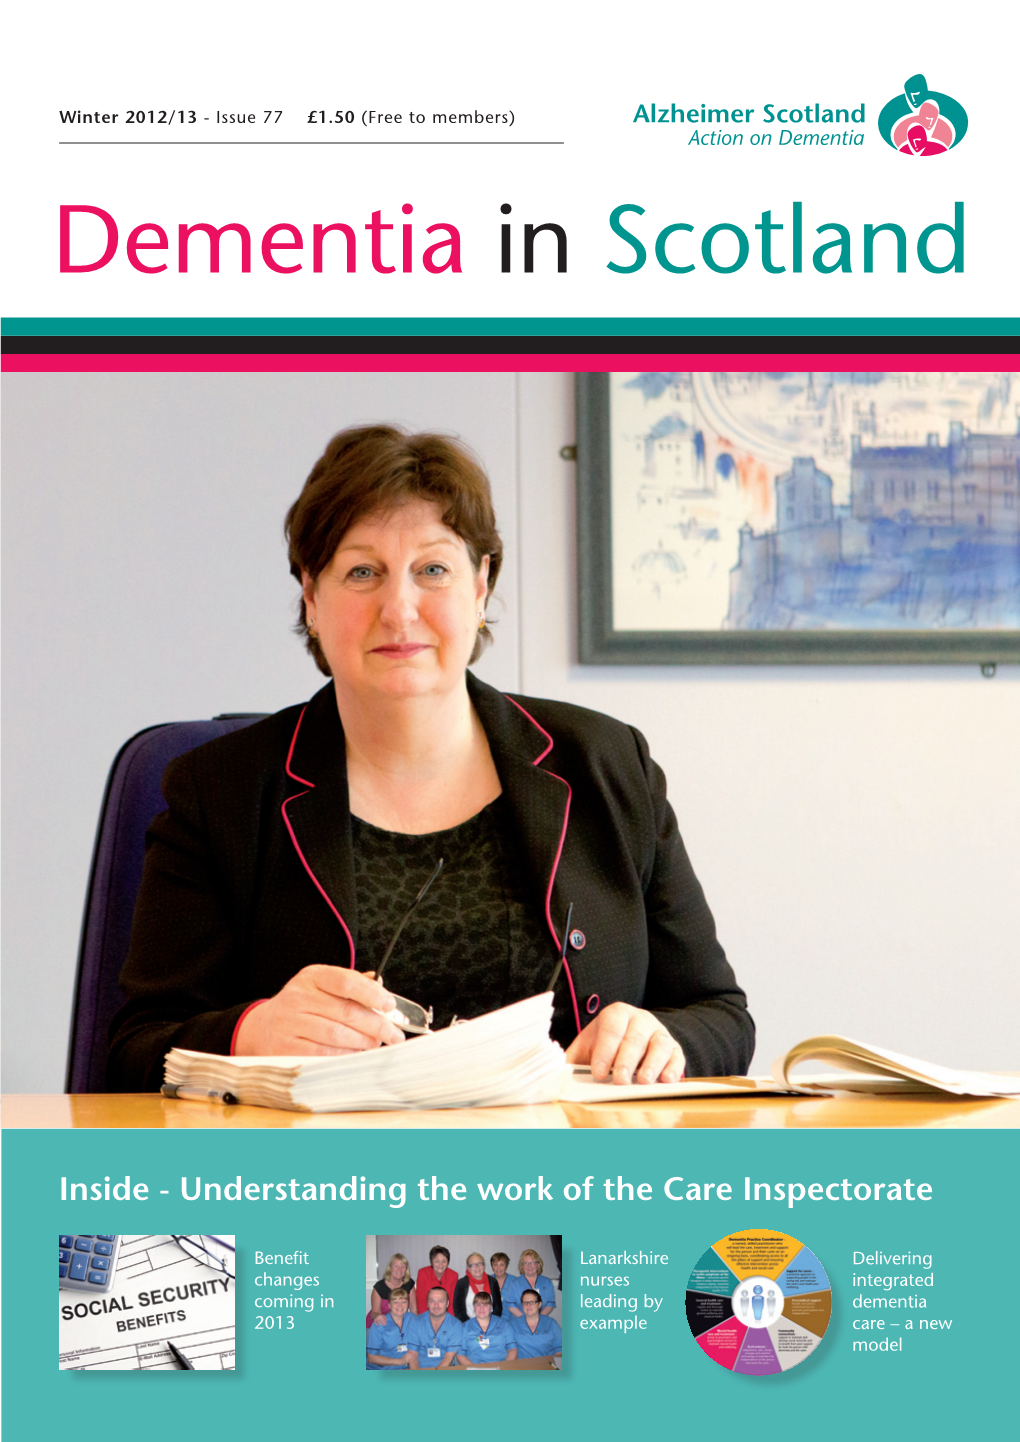 Inside - Understanding the Work of the Care Inspectorate